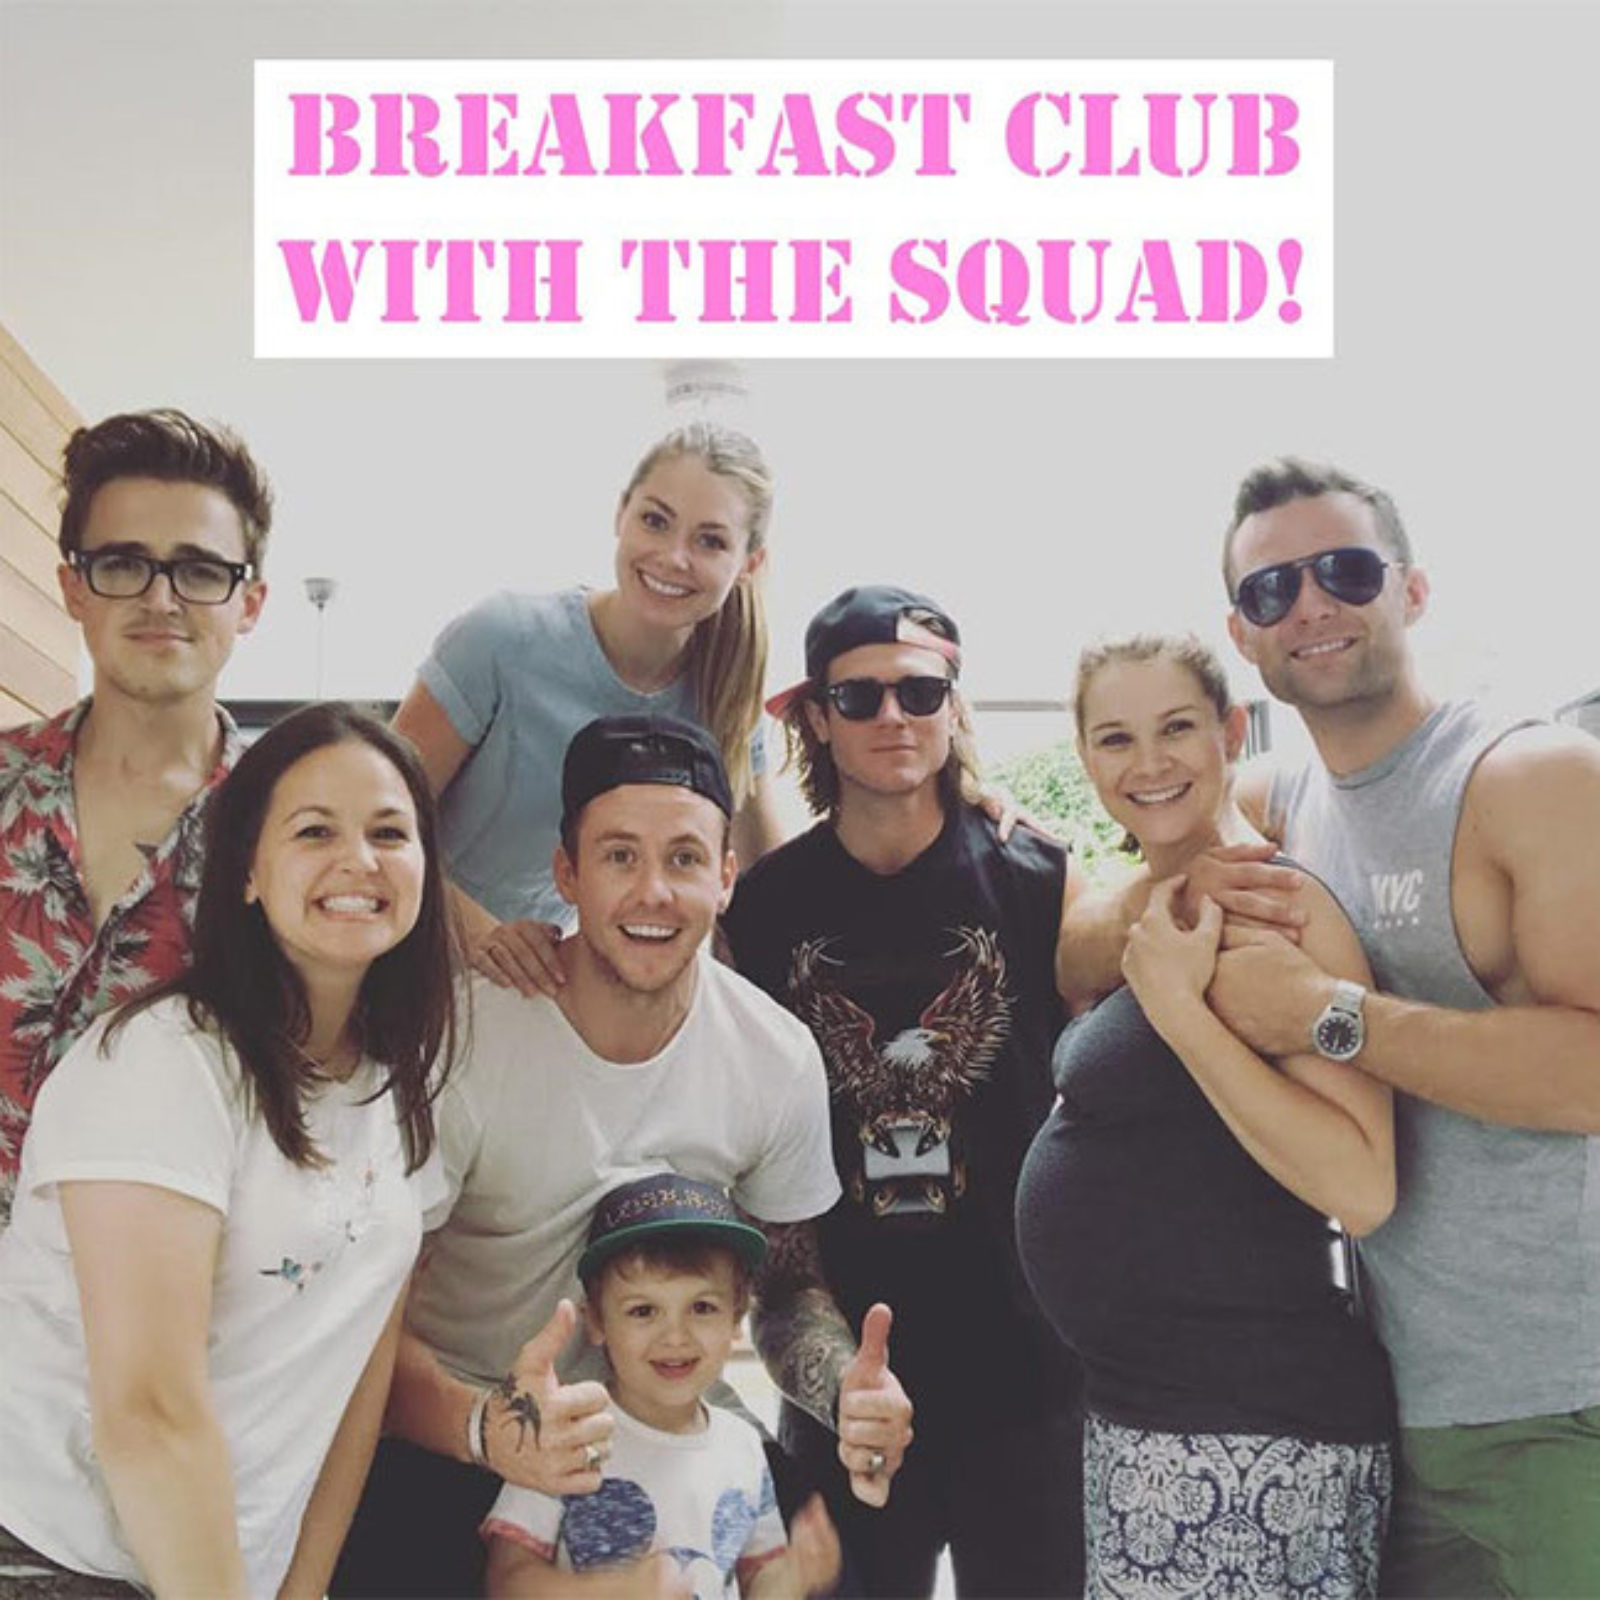 Breakfast club, Wimbledon, and a series of book launches! 